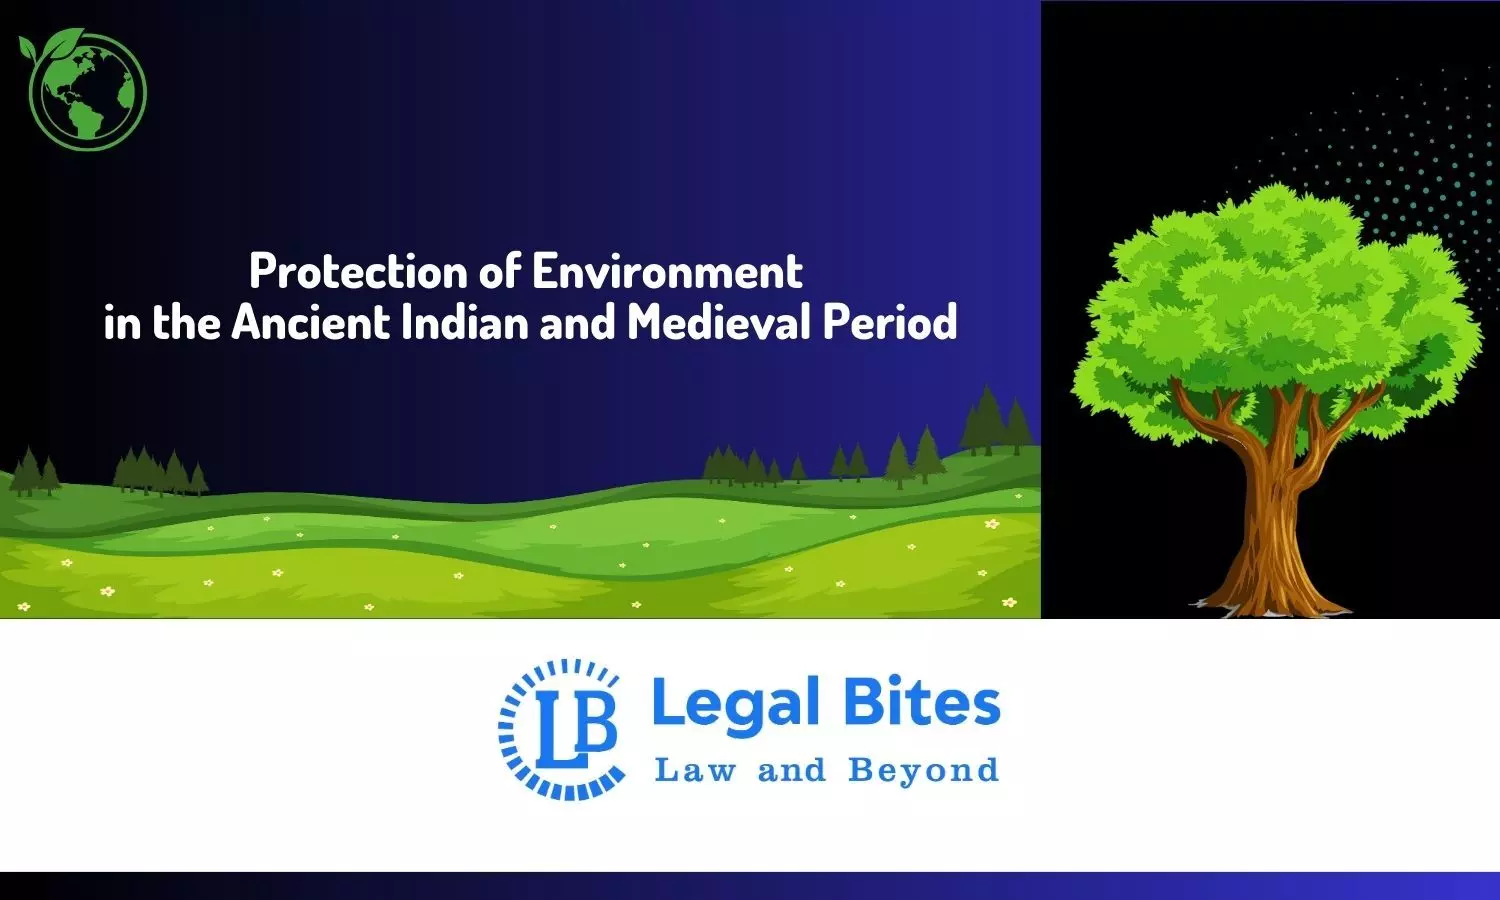 Protection of Environment in the Ancient Indian and Medieval Period